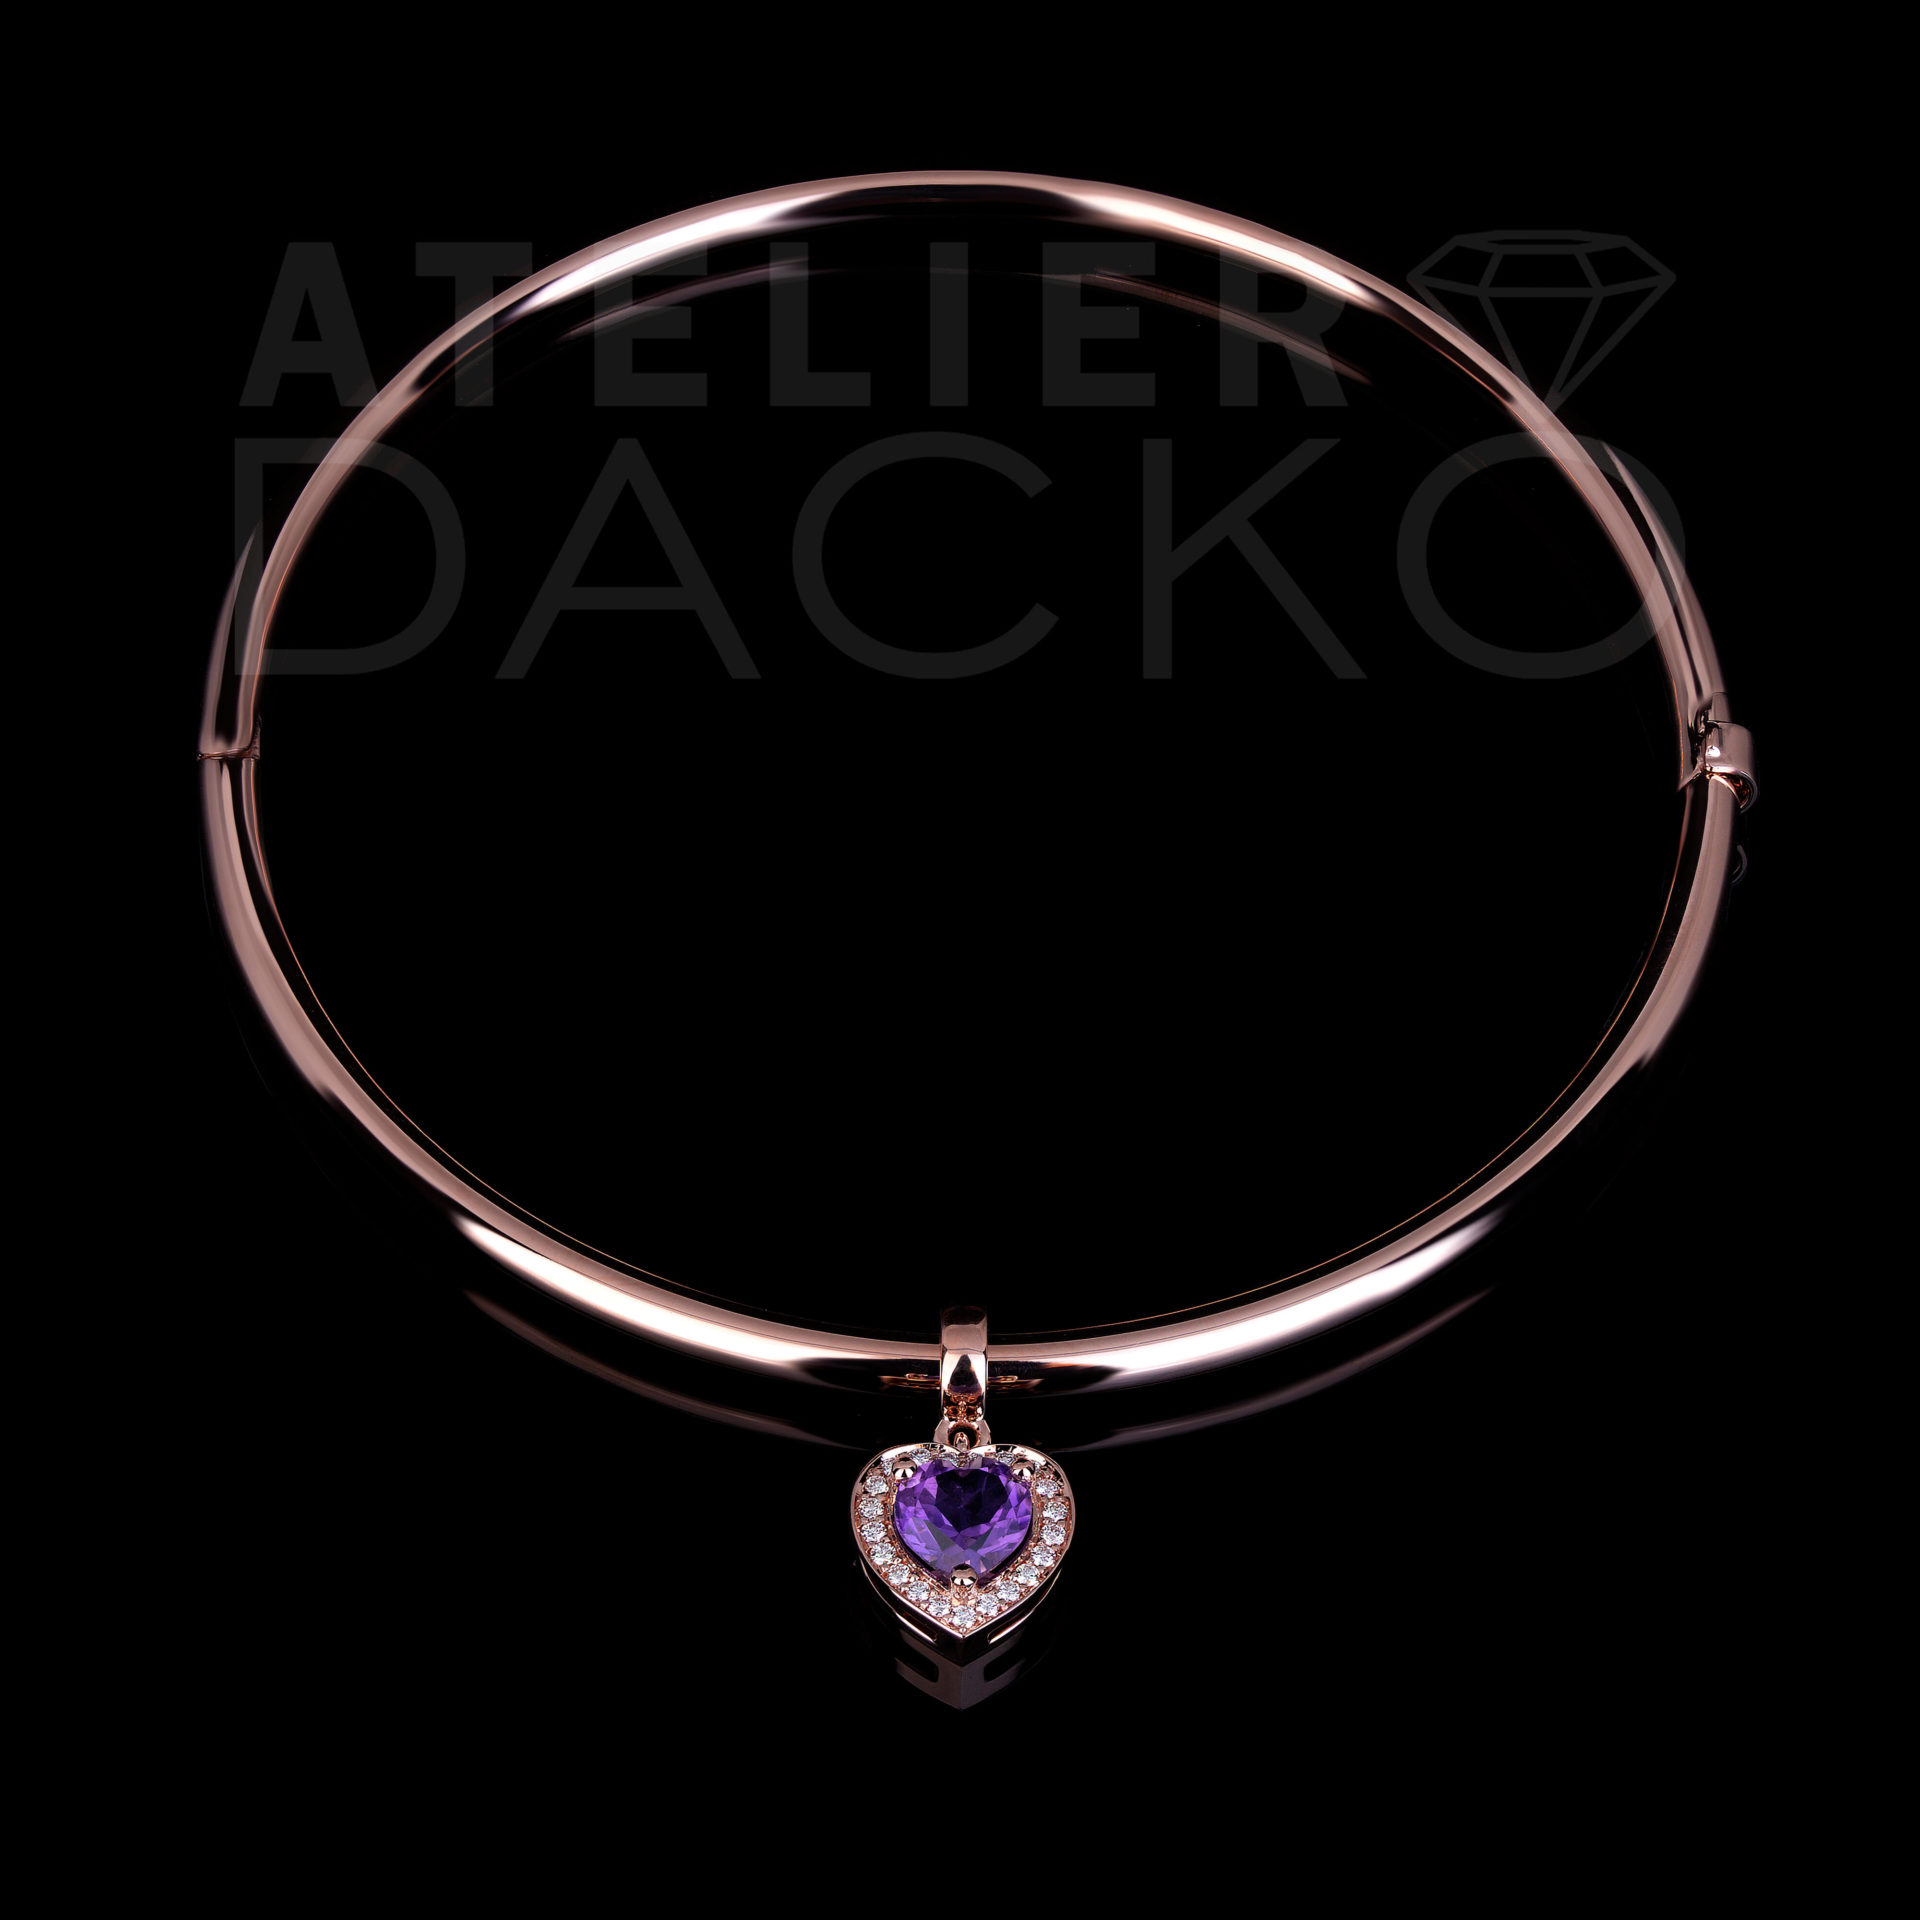 AD059 - Rose Gold Bangle Bracelet with Heart Shaped Amethyst Charm - 1